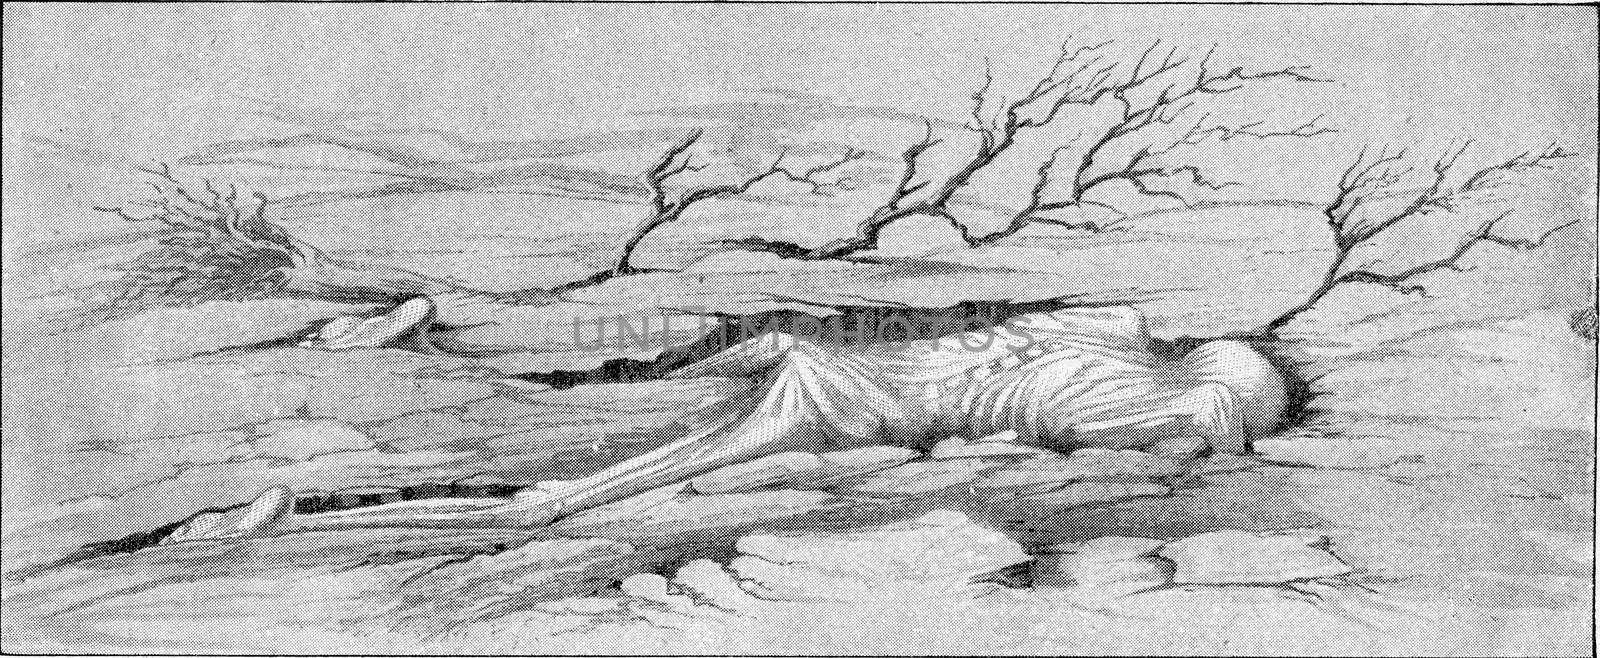 A victim of the tidal wave caused by the eruption of Krakatoa, vintage engraved illustration. From the Universe and Humanity, 1910.
